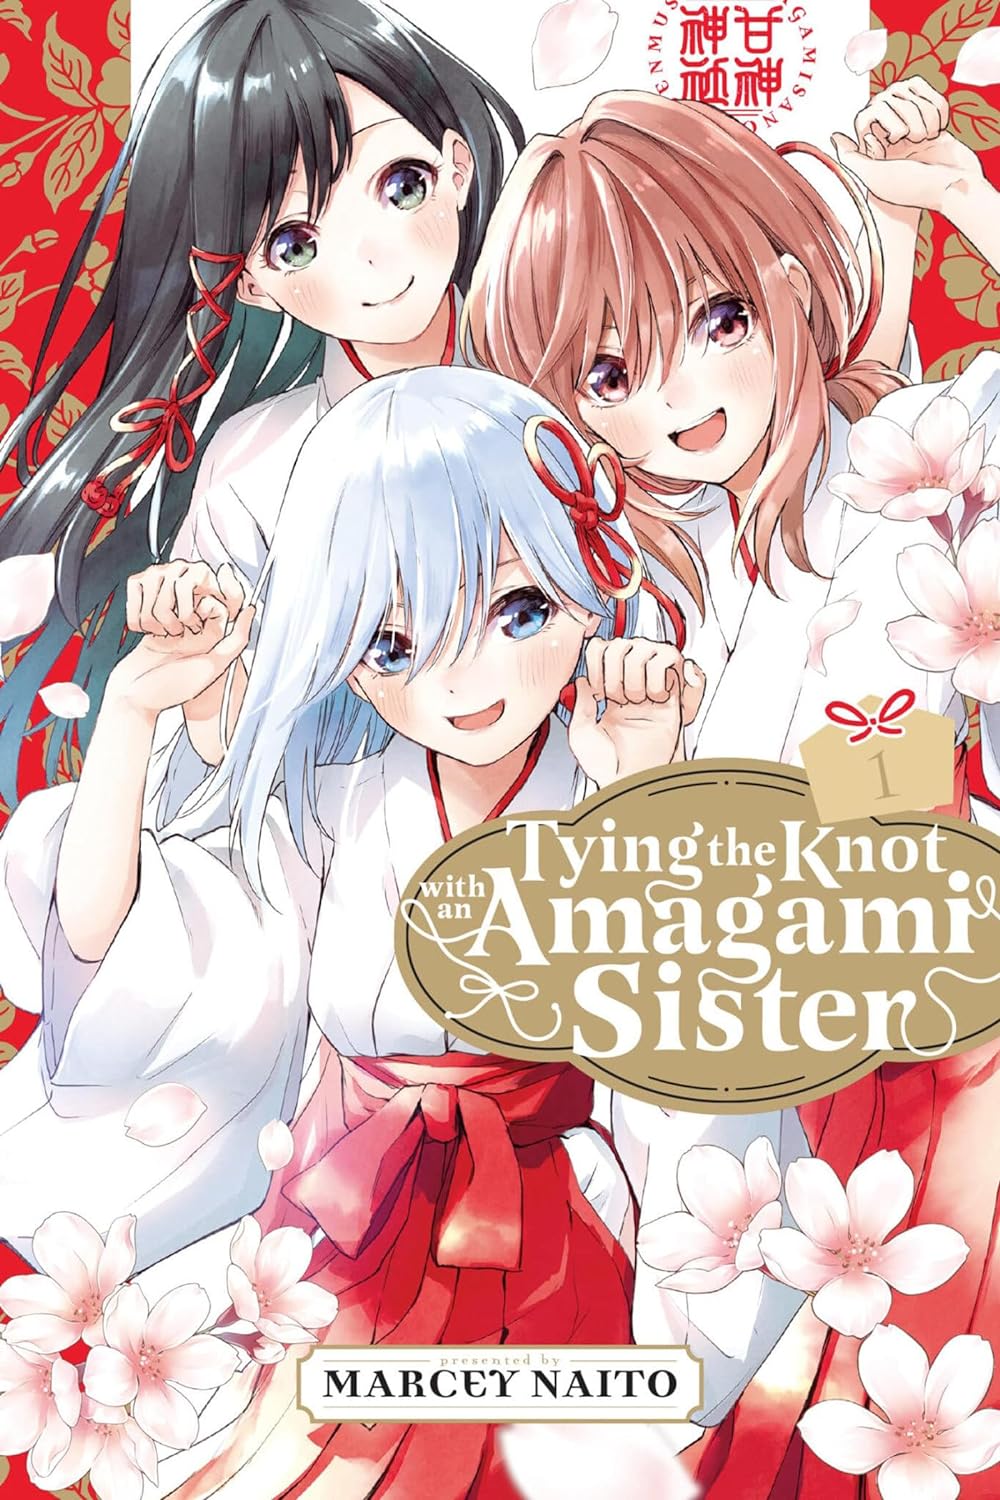 Manga of Tying the Knot with an Amagami Sister